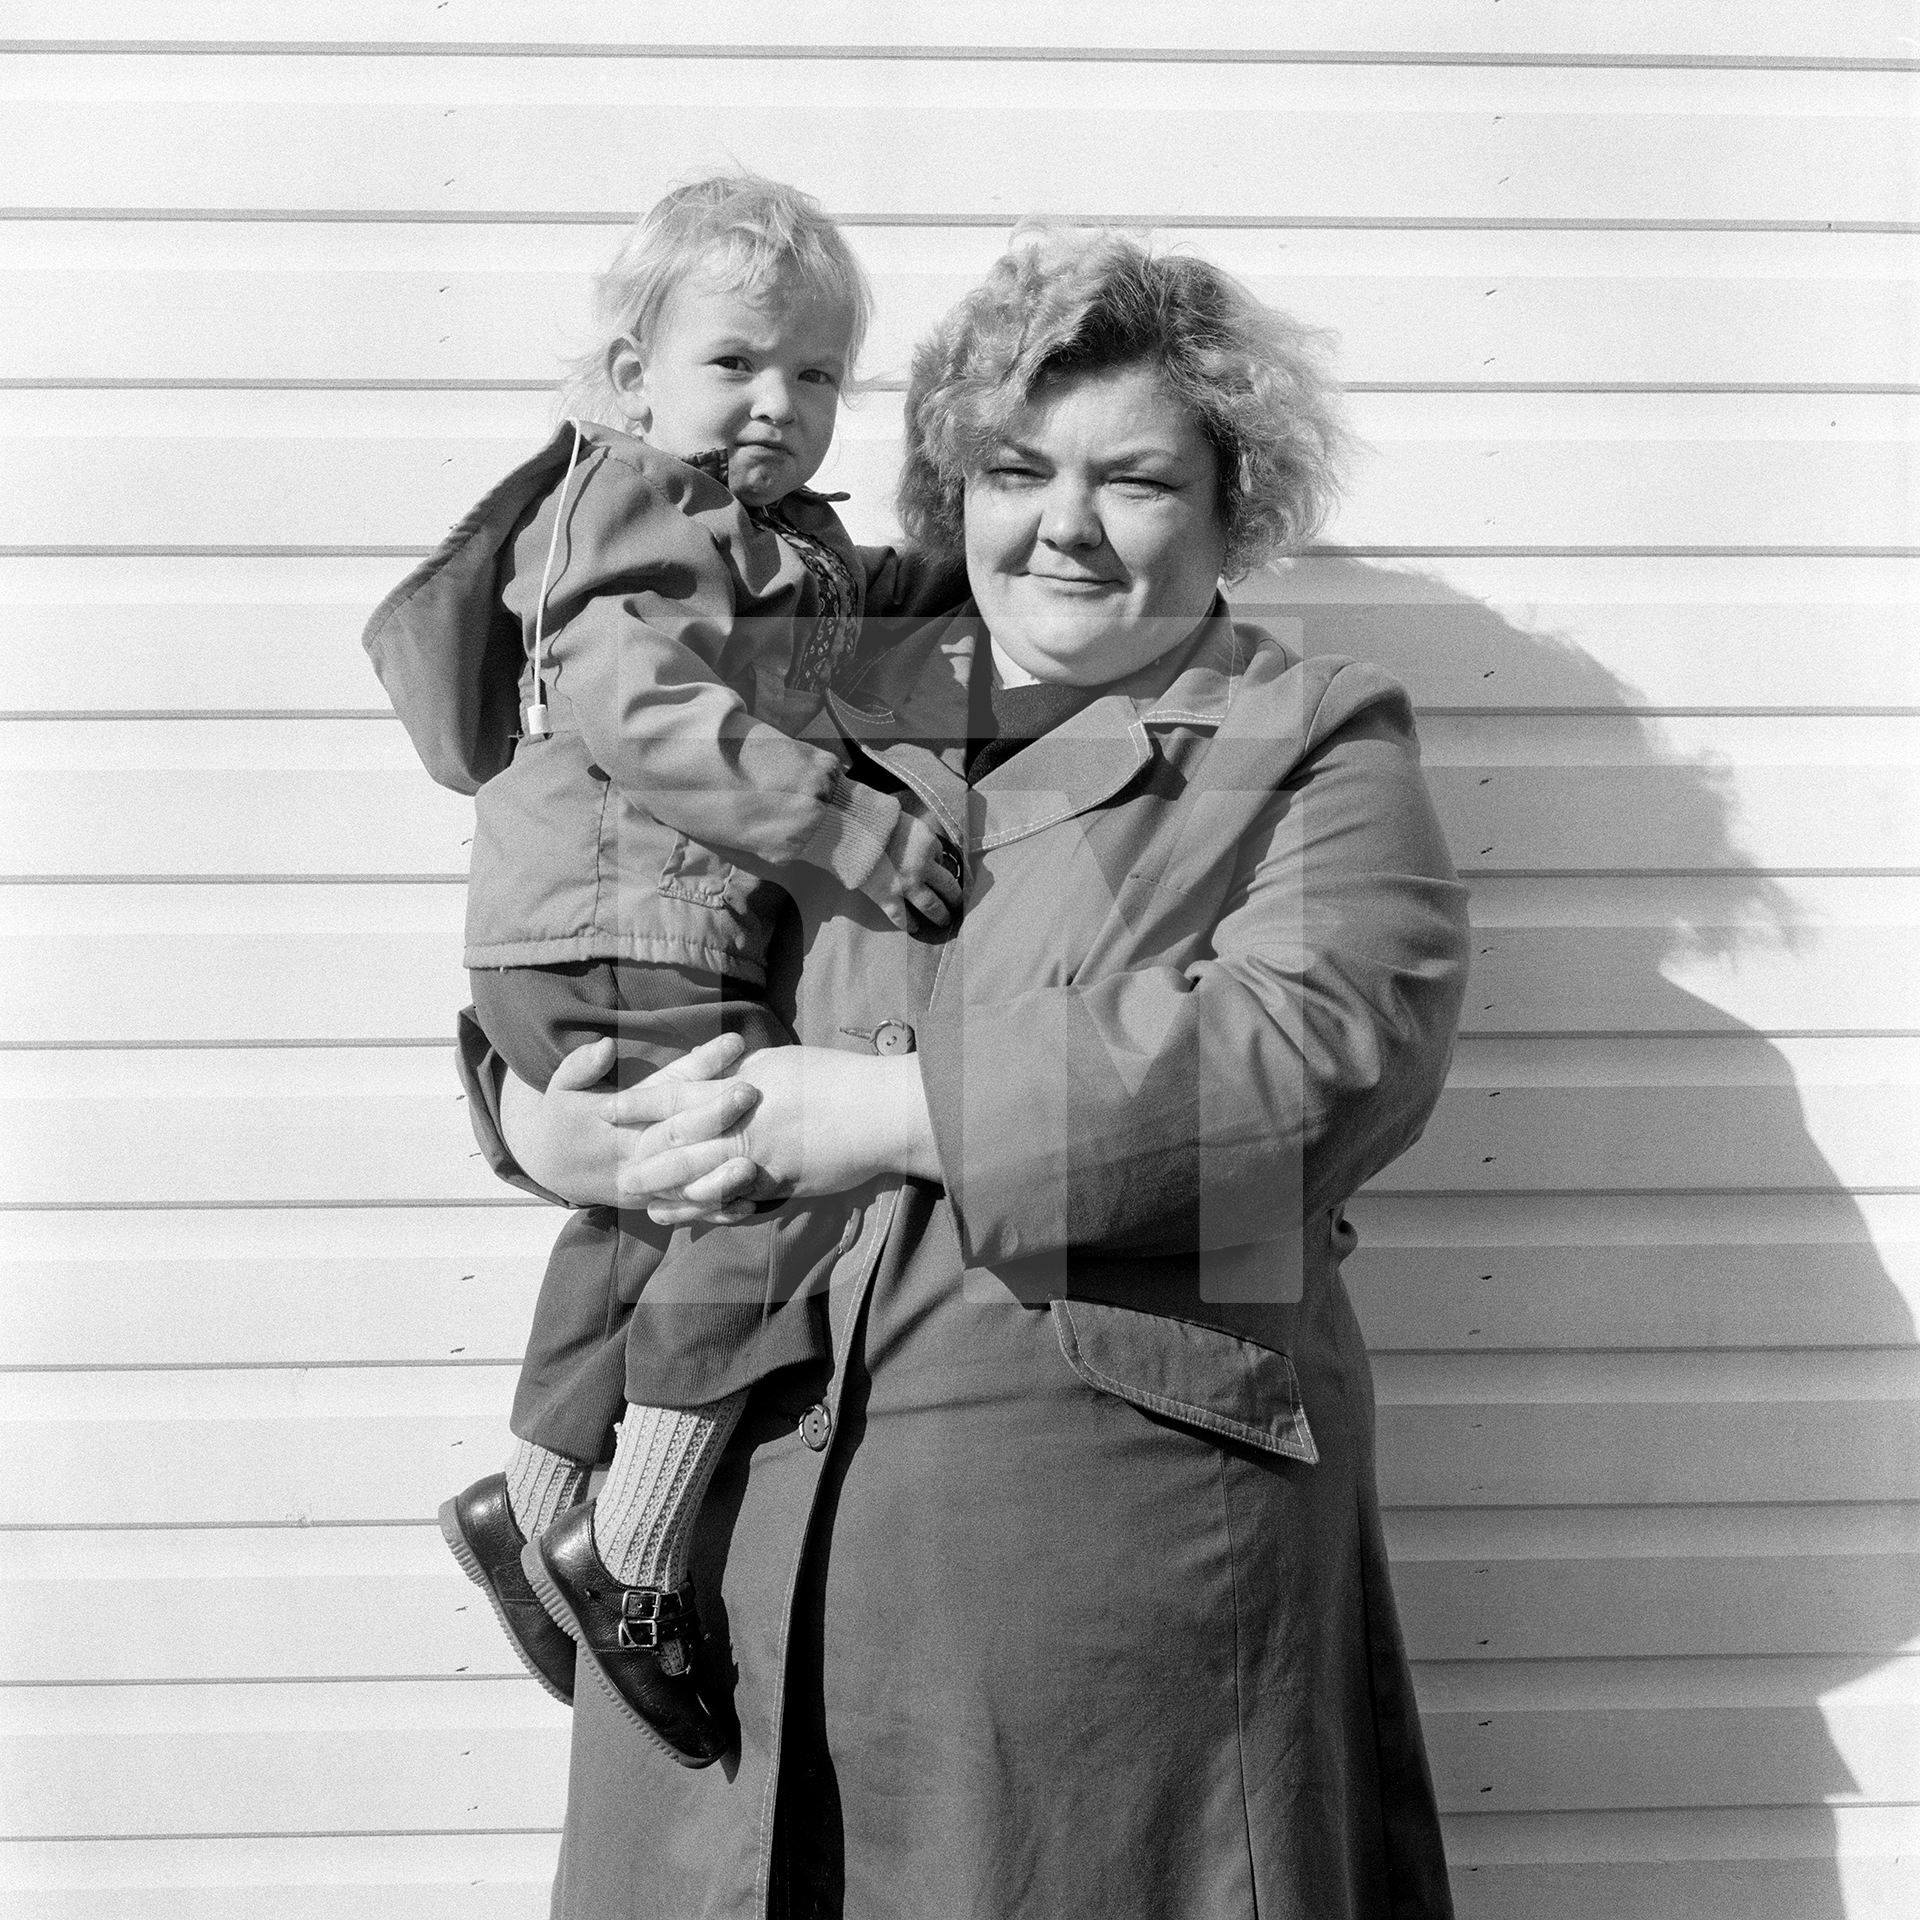 Mother and son, Mary and David Ingram, Hartlepool, Cleveland. September 1974 by Daniel Meadows